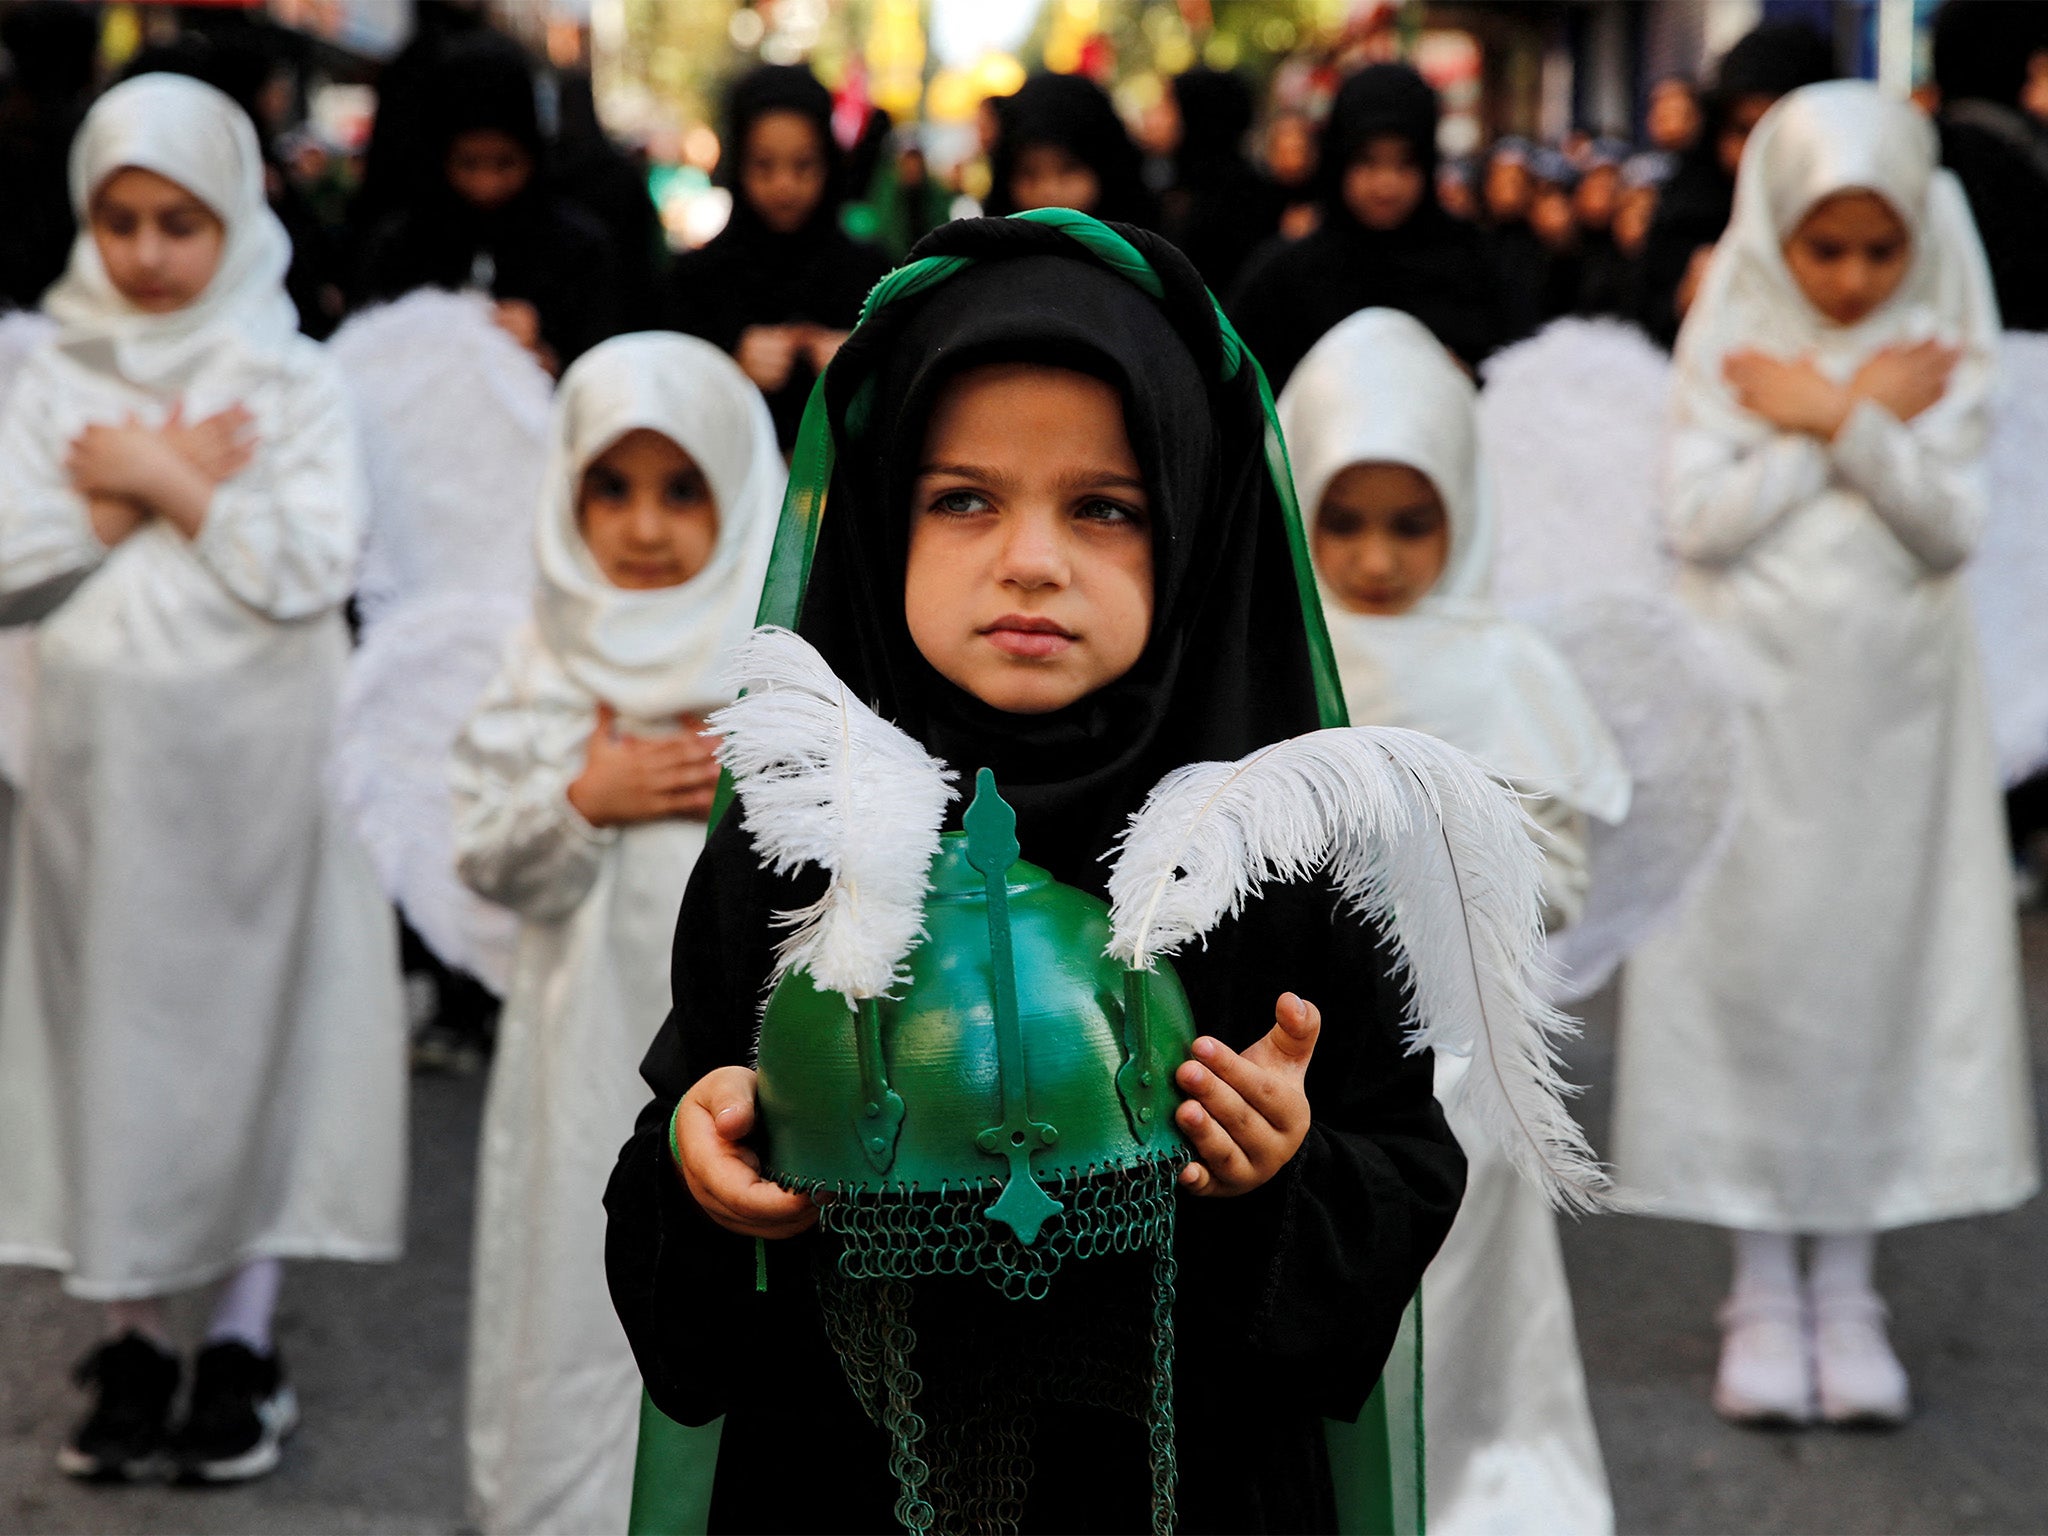 Young Shia Muslims take part in a mourning procession to mark Ashura, the holiest day in the Shia Muslim calendar, in Istanbul